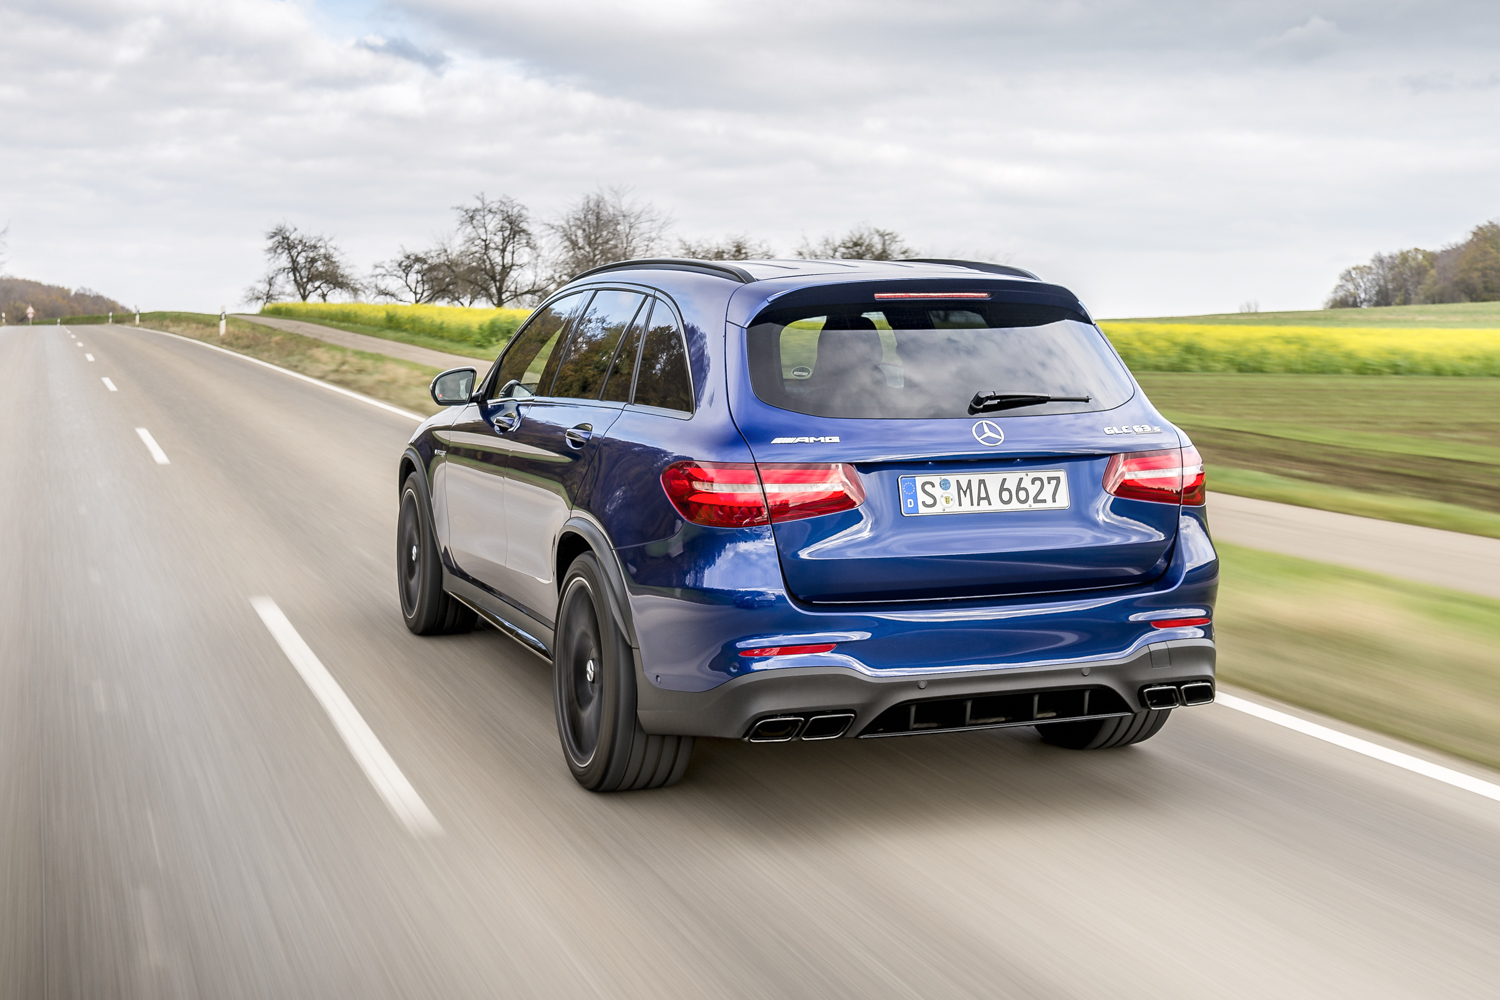 2018 Mercedes-AMG GLC63 S First Drive Review | Digital Trends